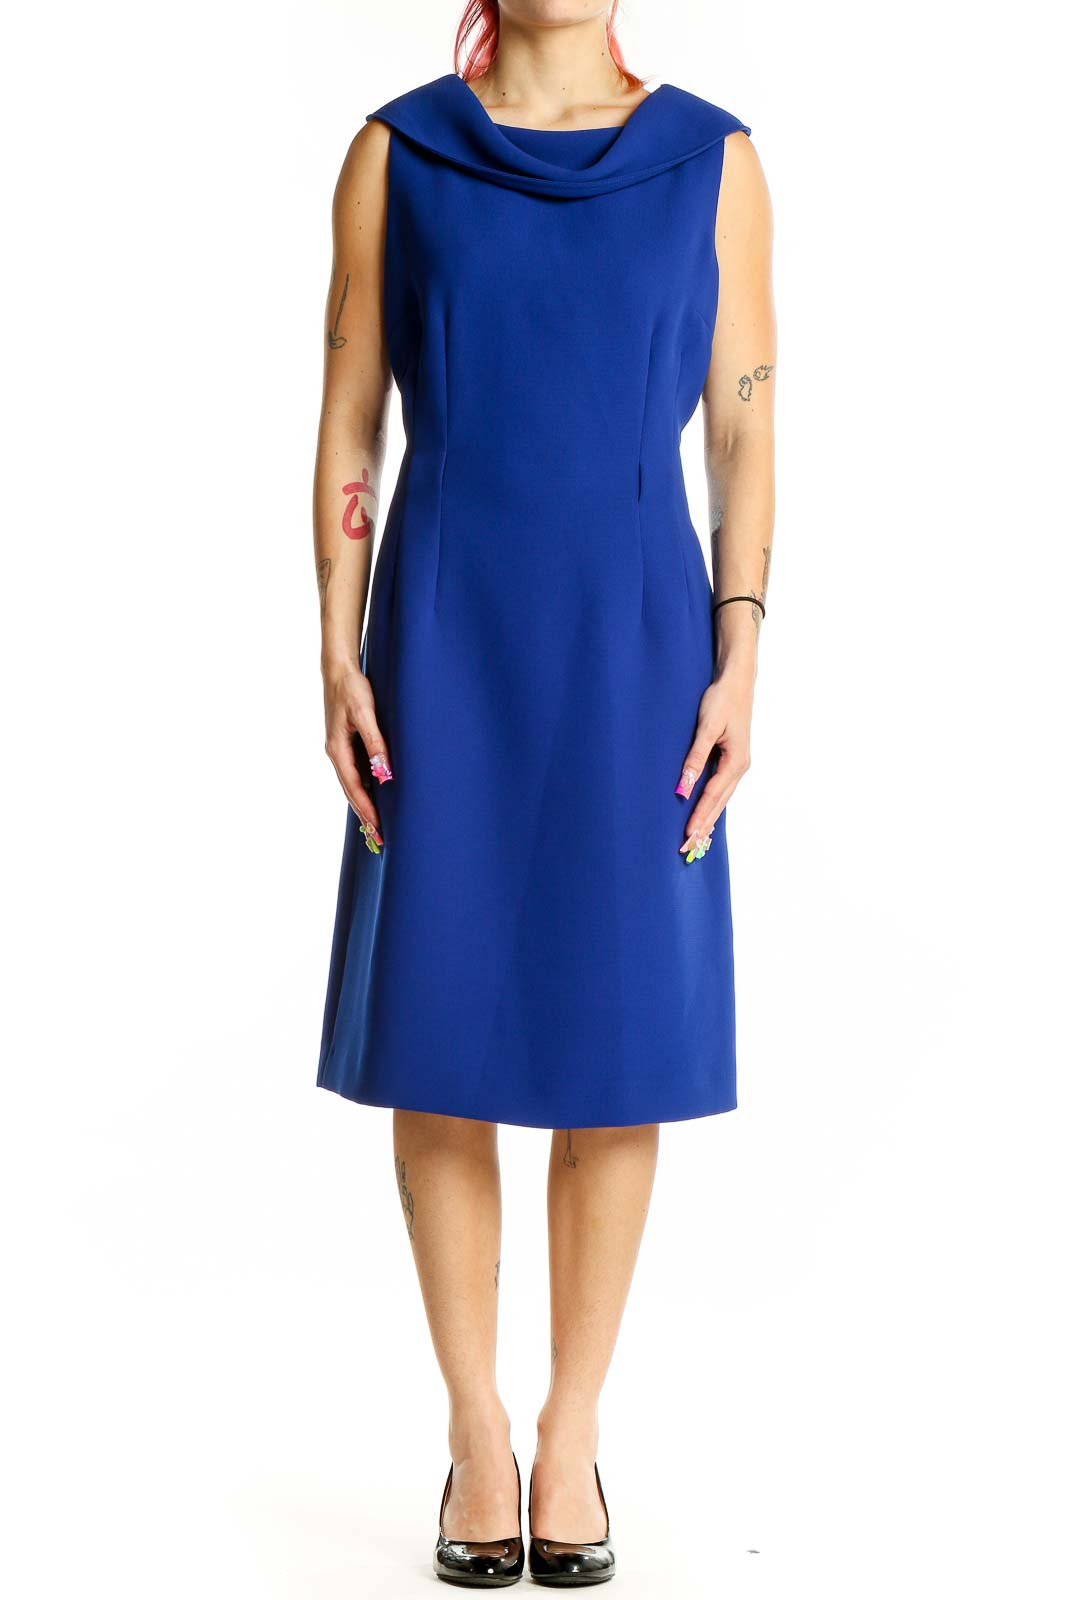 Blue Cowl Solid Dress Front